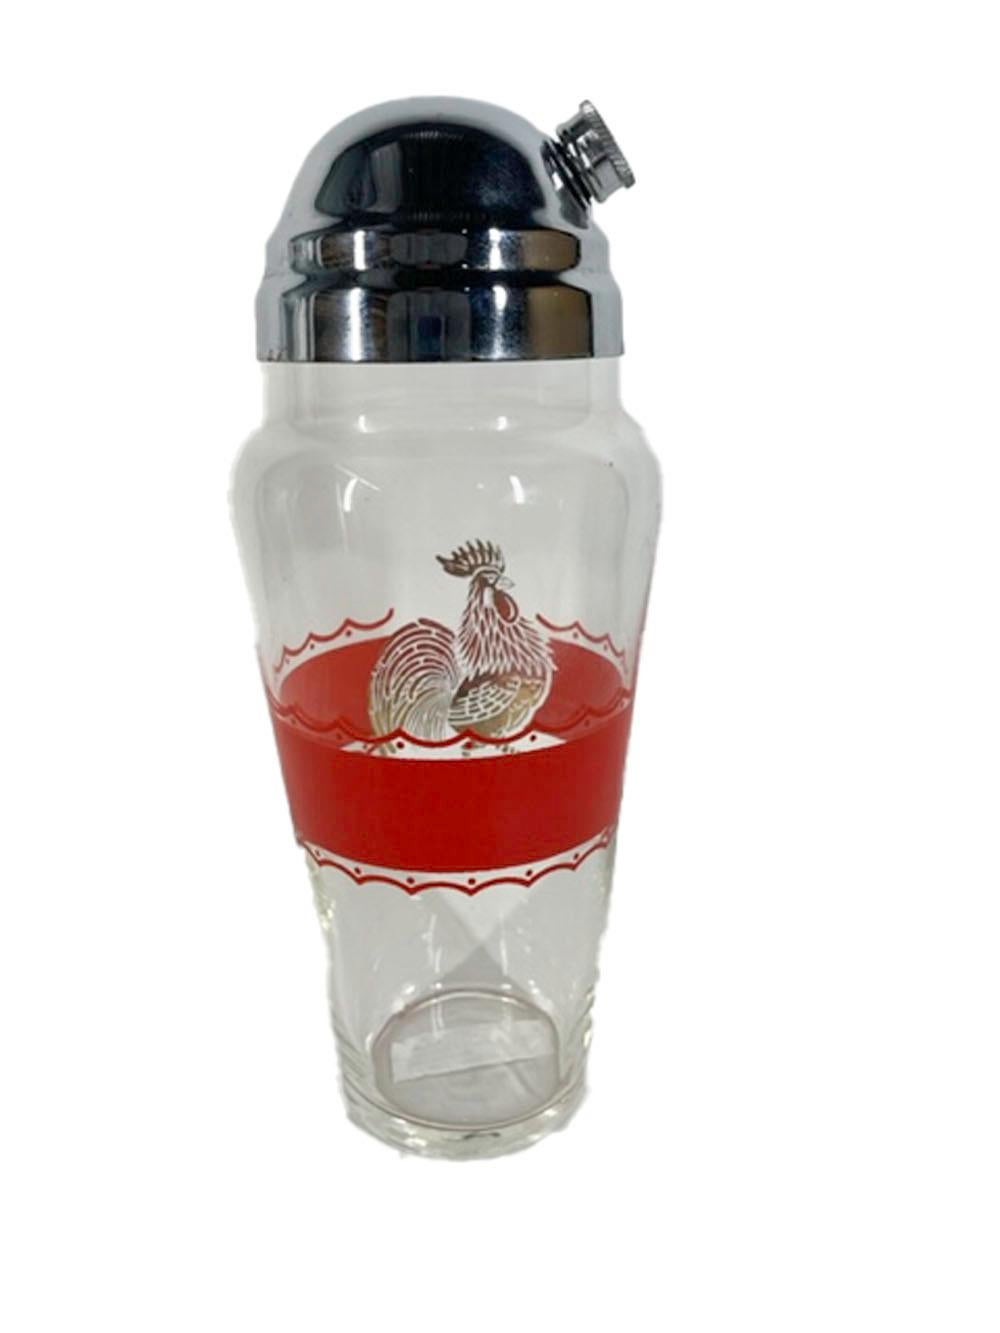 Large art deco glass cocktail shaker with a wide central red enamel bordered with a wavey line and tots above and below and interrupted with a large image of a rooster in 22k gold. The shaker is topped with a high domed chrome lid with a strainer